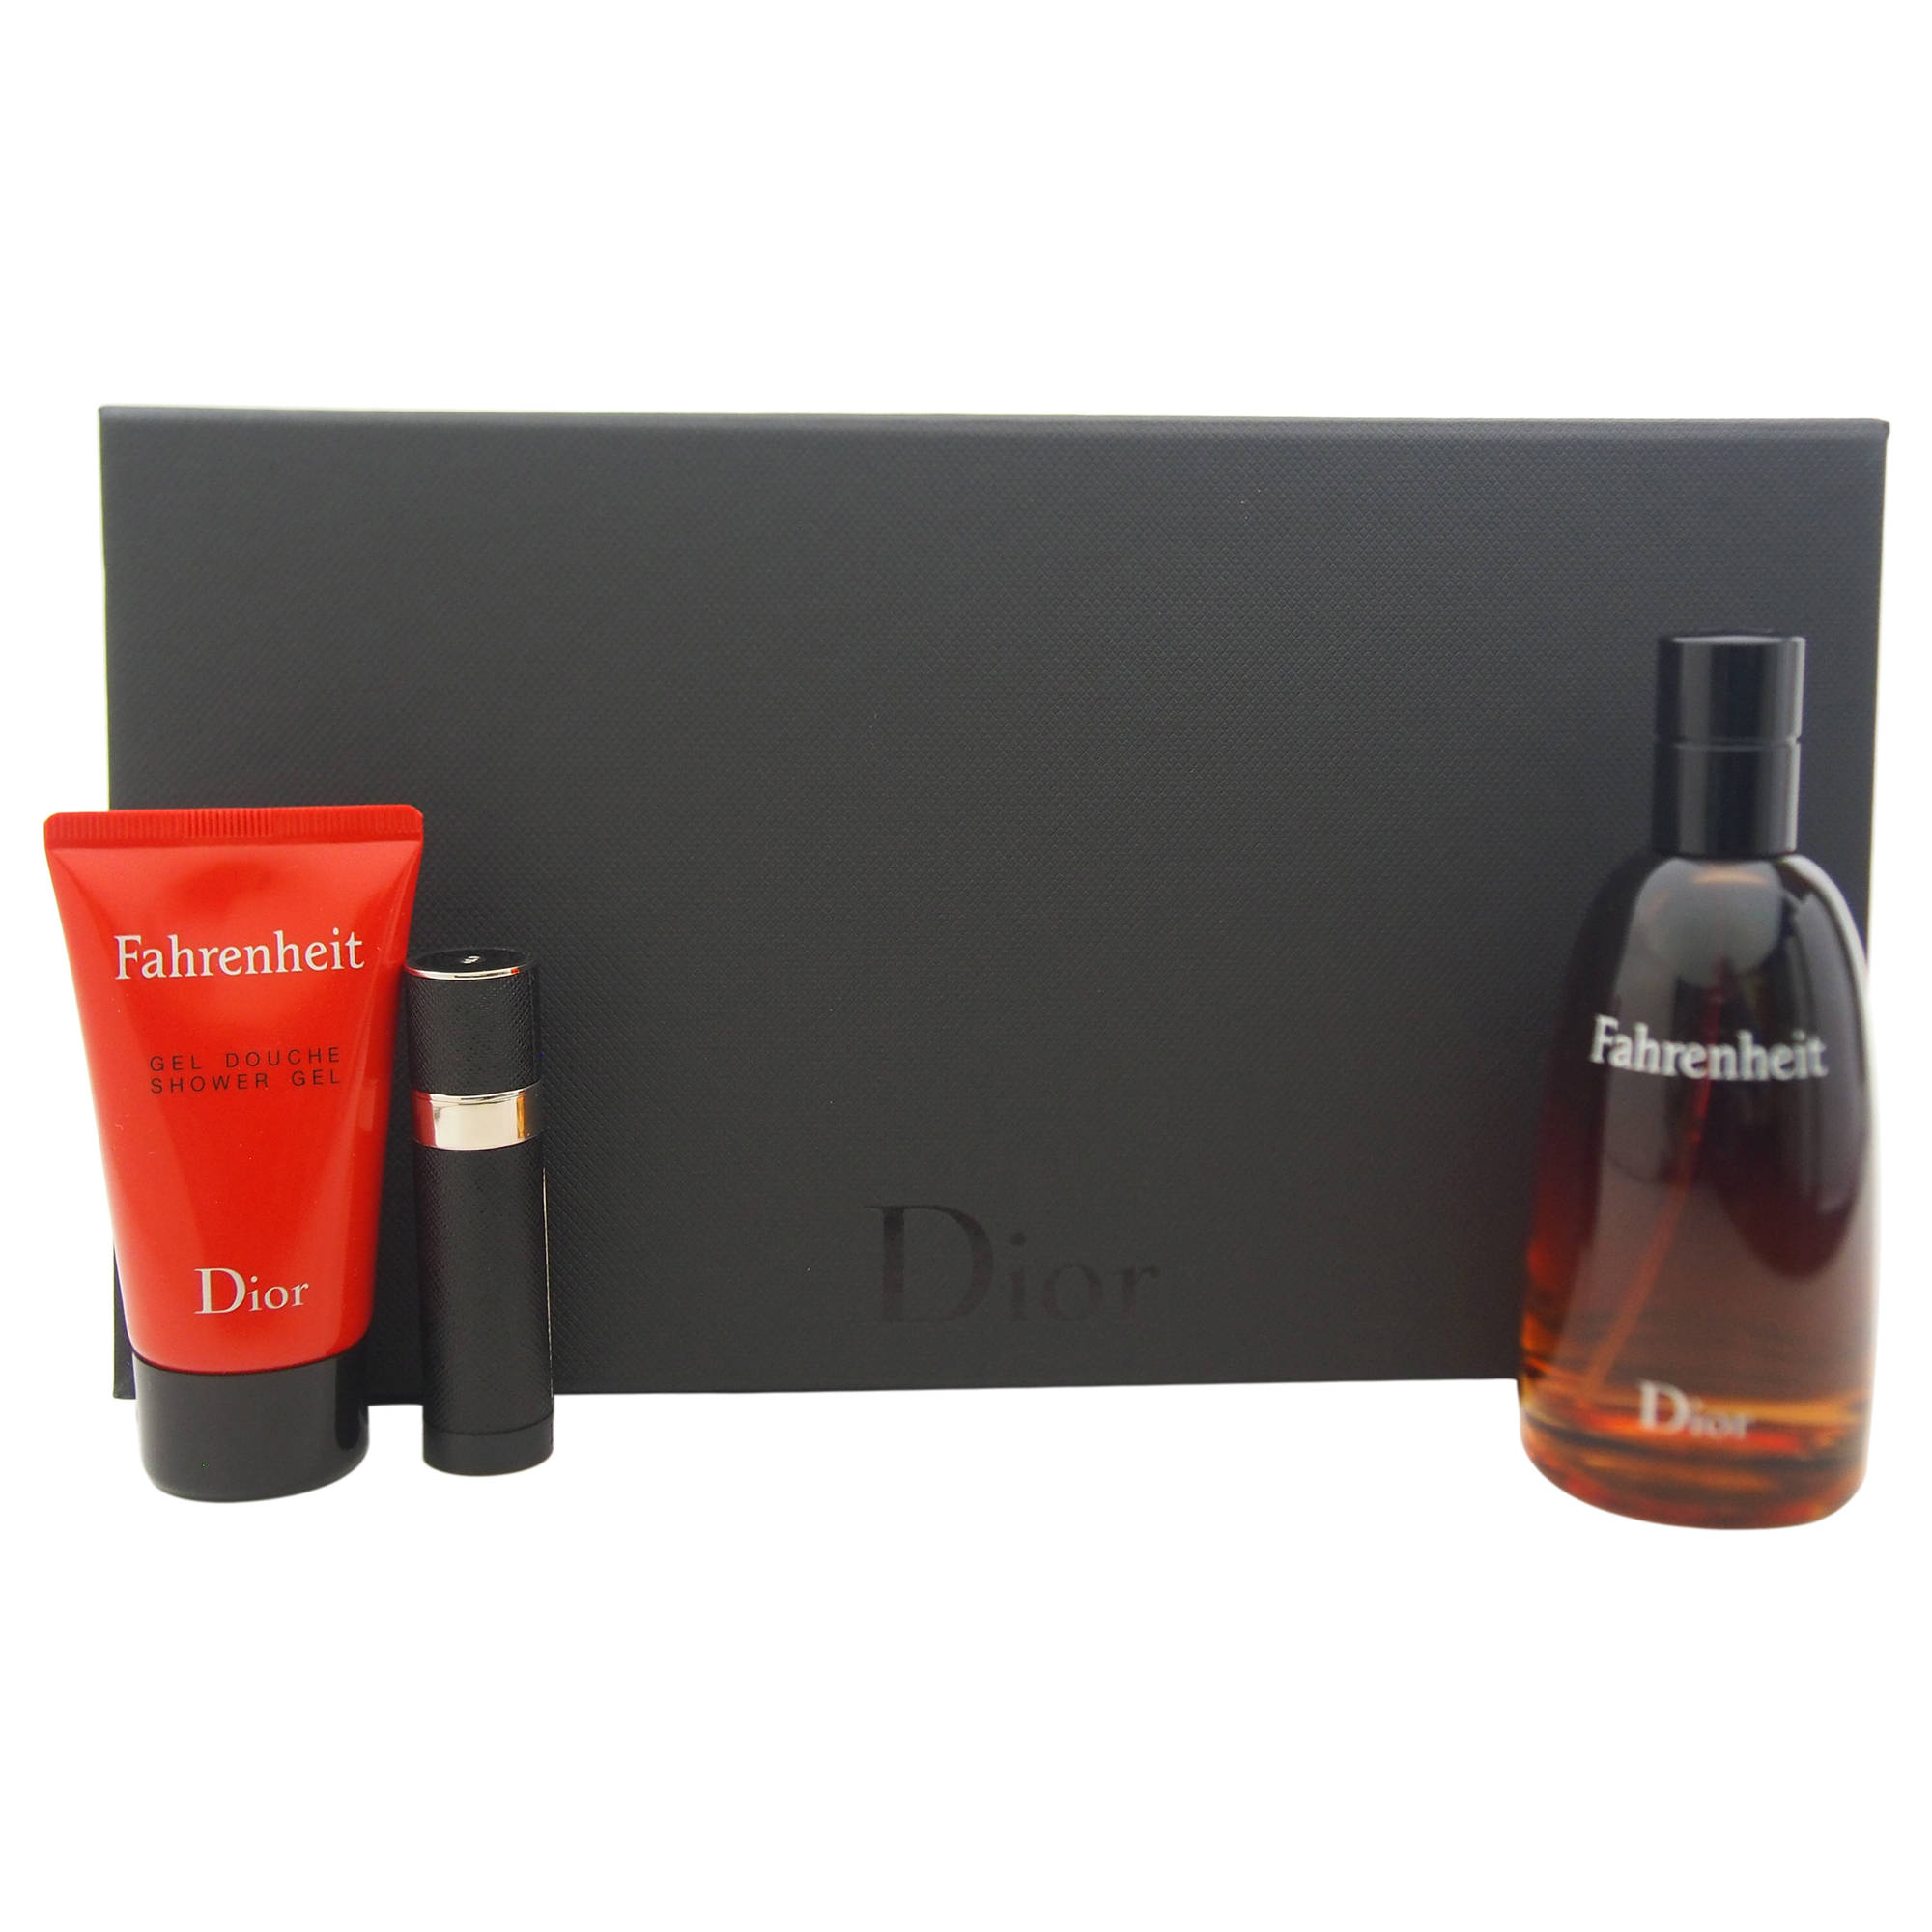 Fahrenheit by Christian Dior for Men - 3 Pc Gift Set